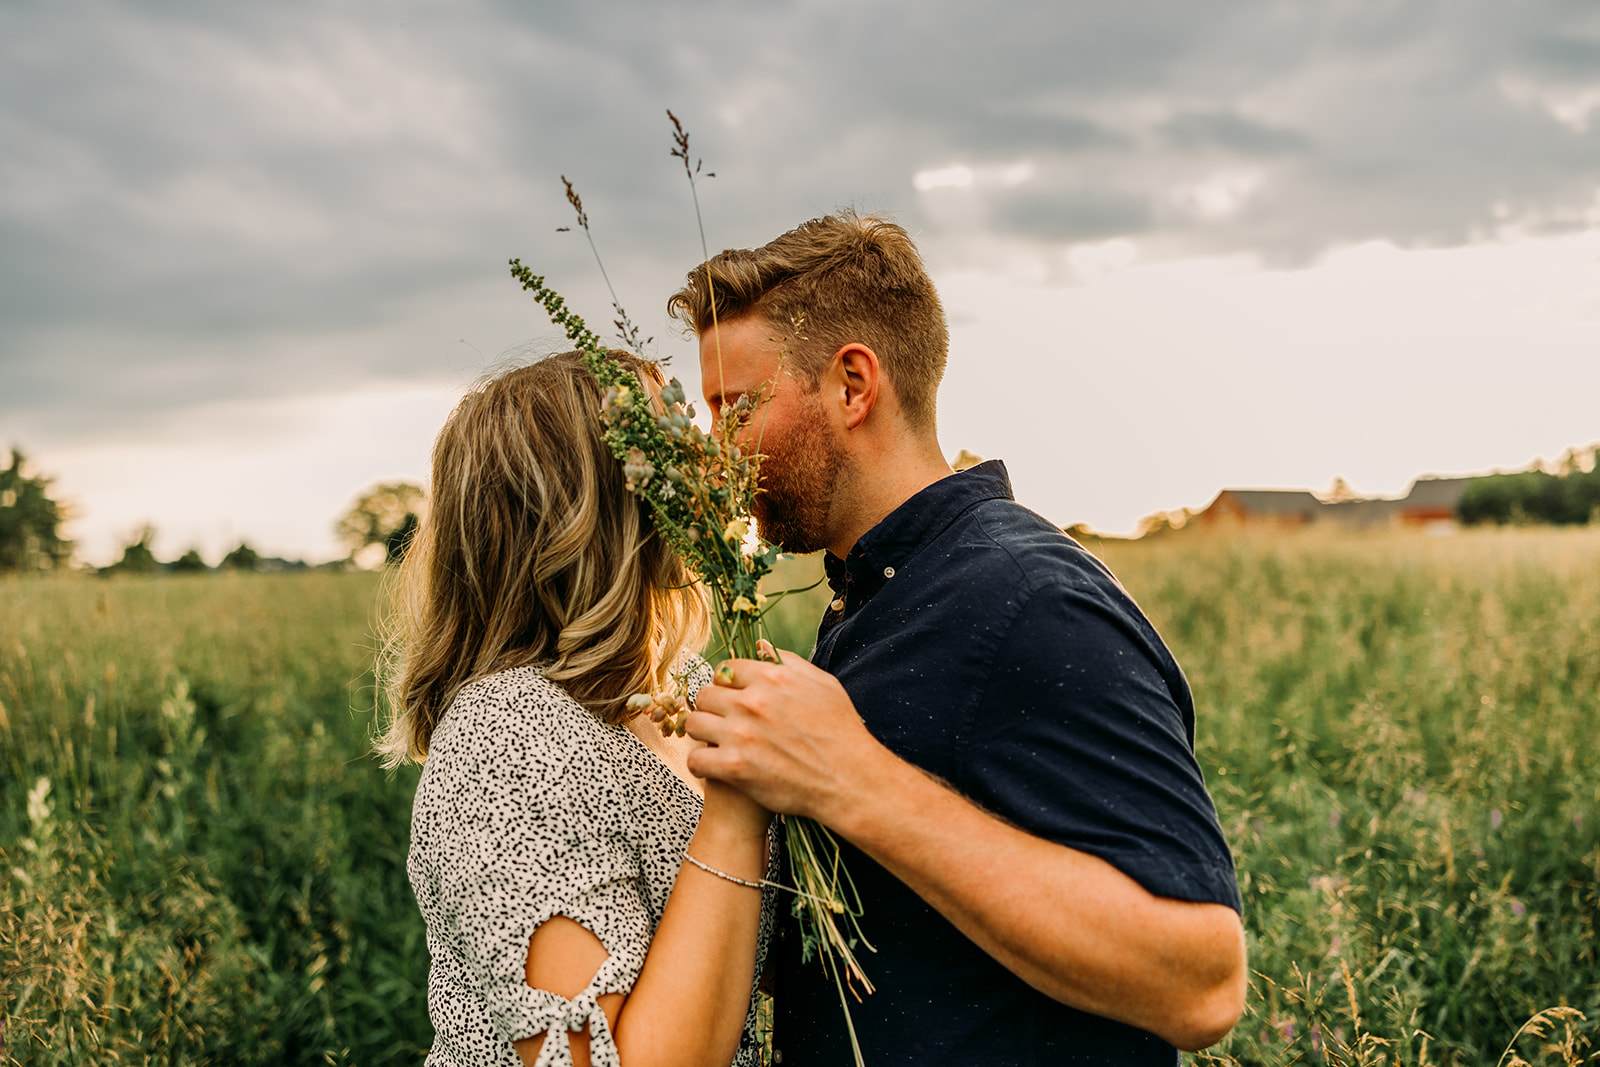 Couples engagement shoot filled with natural beauty and love